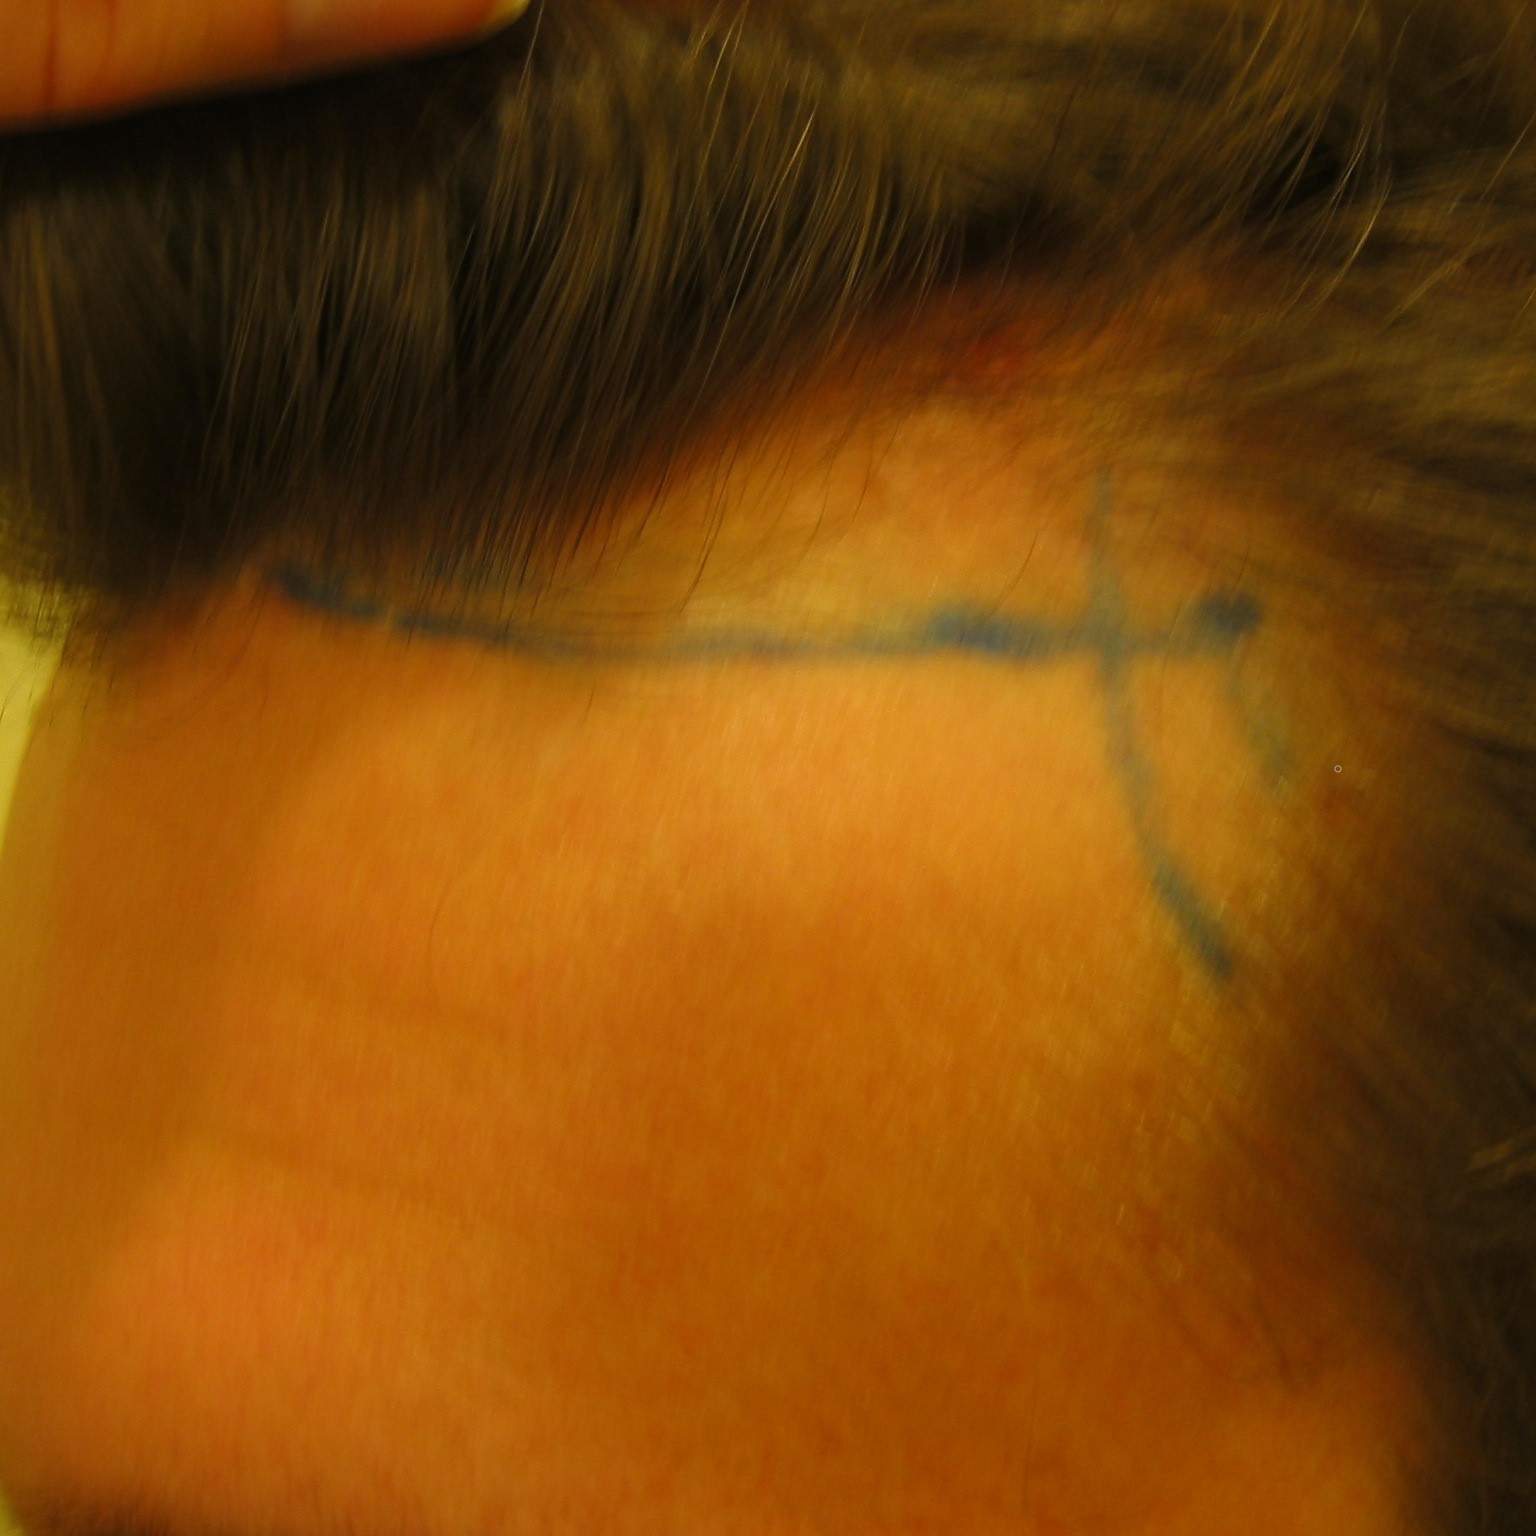 Hair Transplant After 4 Months: Photos, Results, Side Effects, Wimpole Clinic